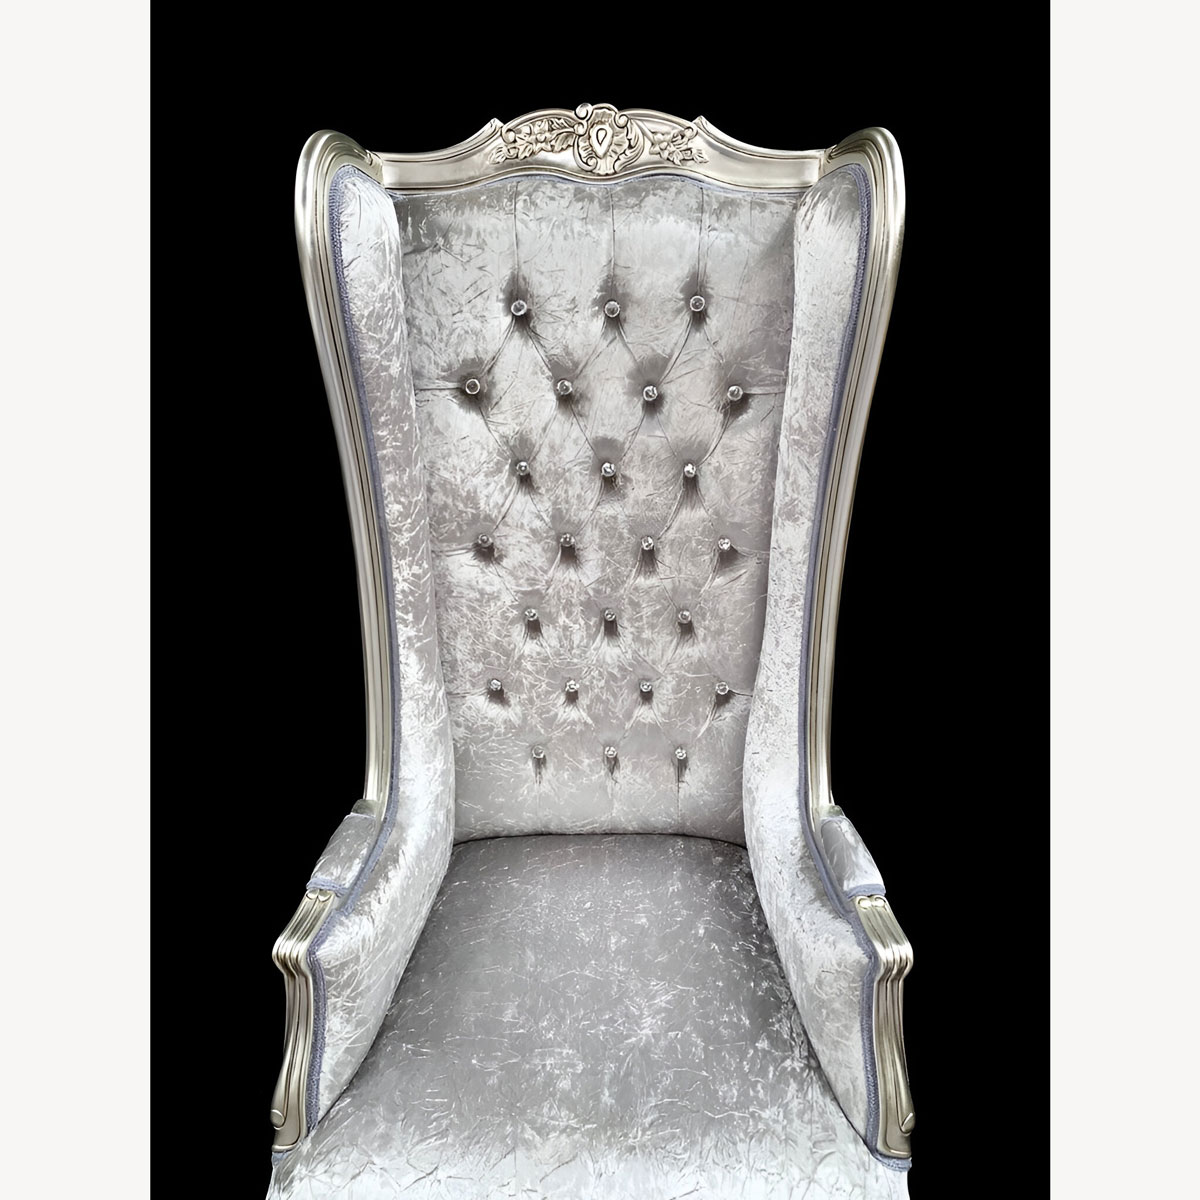 Silver Leaf Ornate Feature High Back Porters Arm Throne Chair In Silver Grey Crushed Velvet Crystal Buttons 4 - Hampshire Barn Interiors - Silver Leaf Ornate Feature High Back Porters Arm Throne Chair In Silver Grey Crushed Velvet Crystal Buttons -